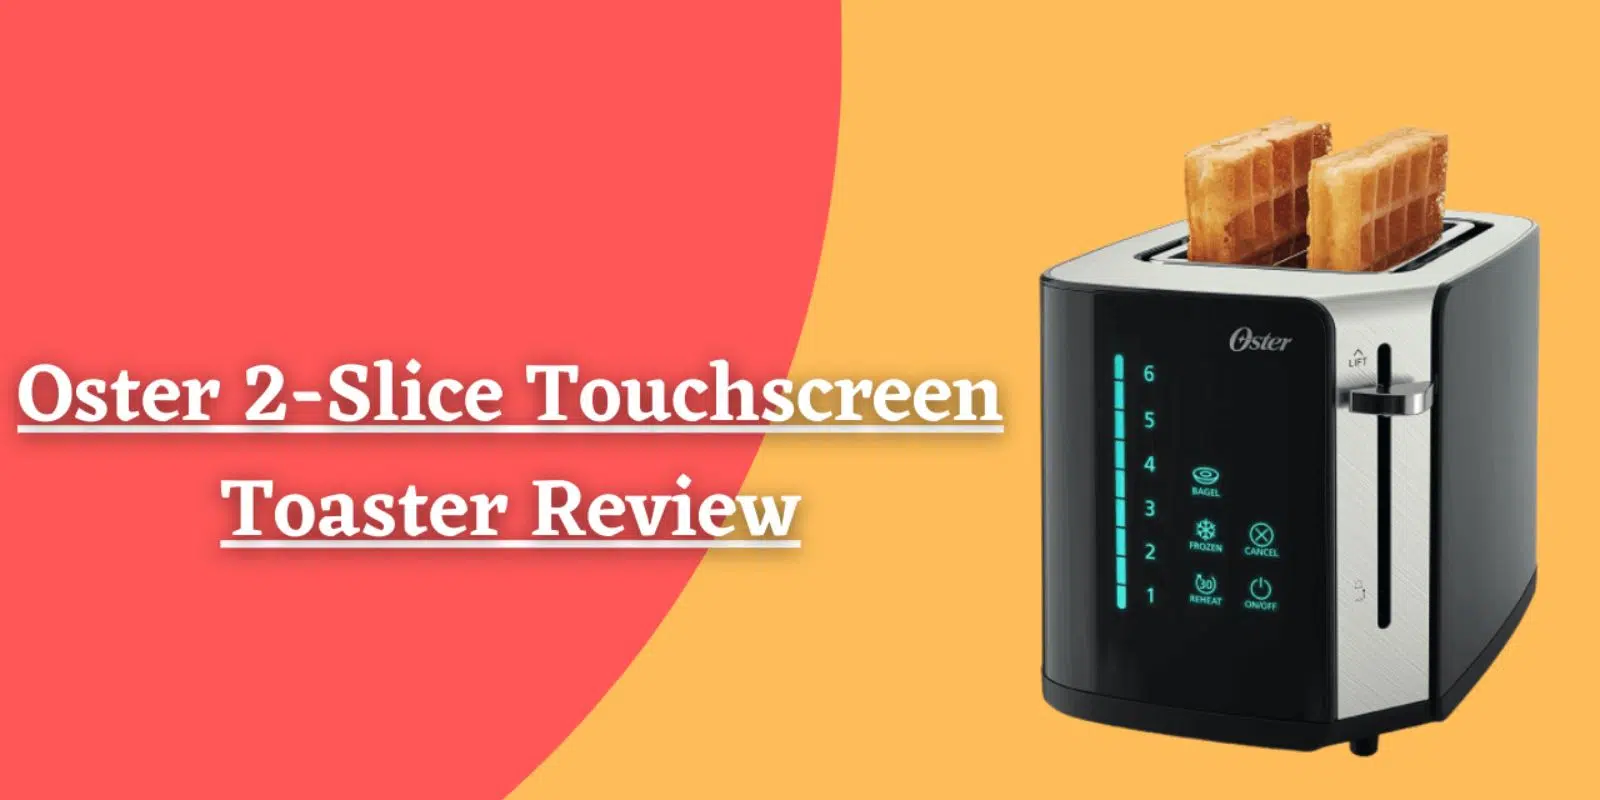 Oster 2-Slice Touchscreen Toaster Review